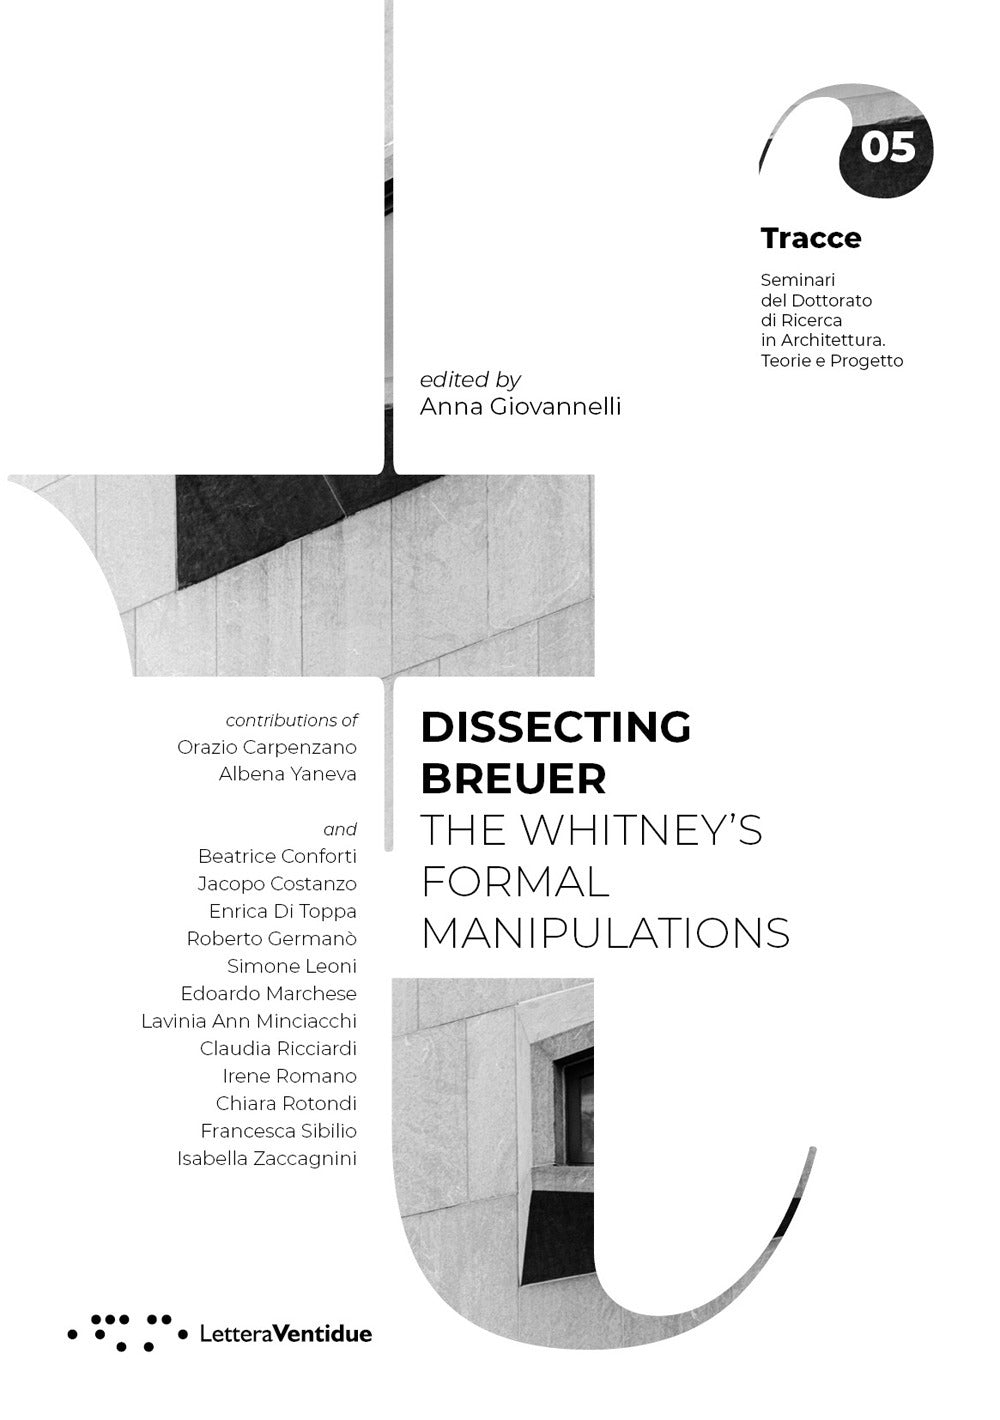 Dissecting Breuer. The Whitney's formal manipulations